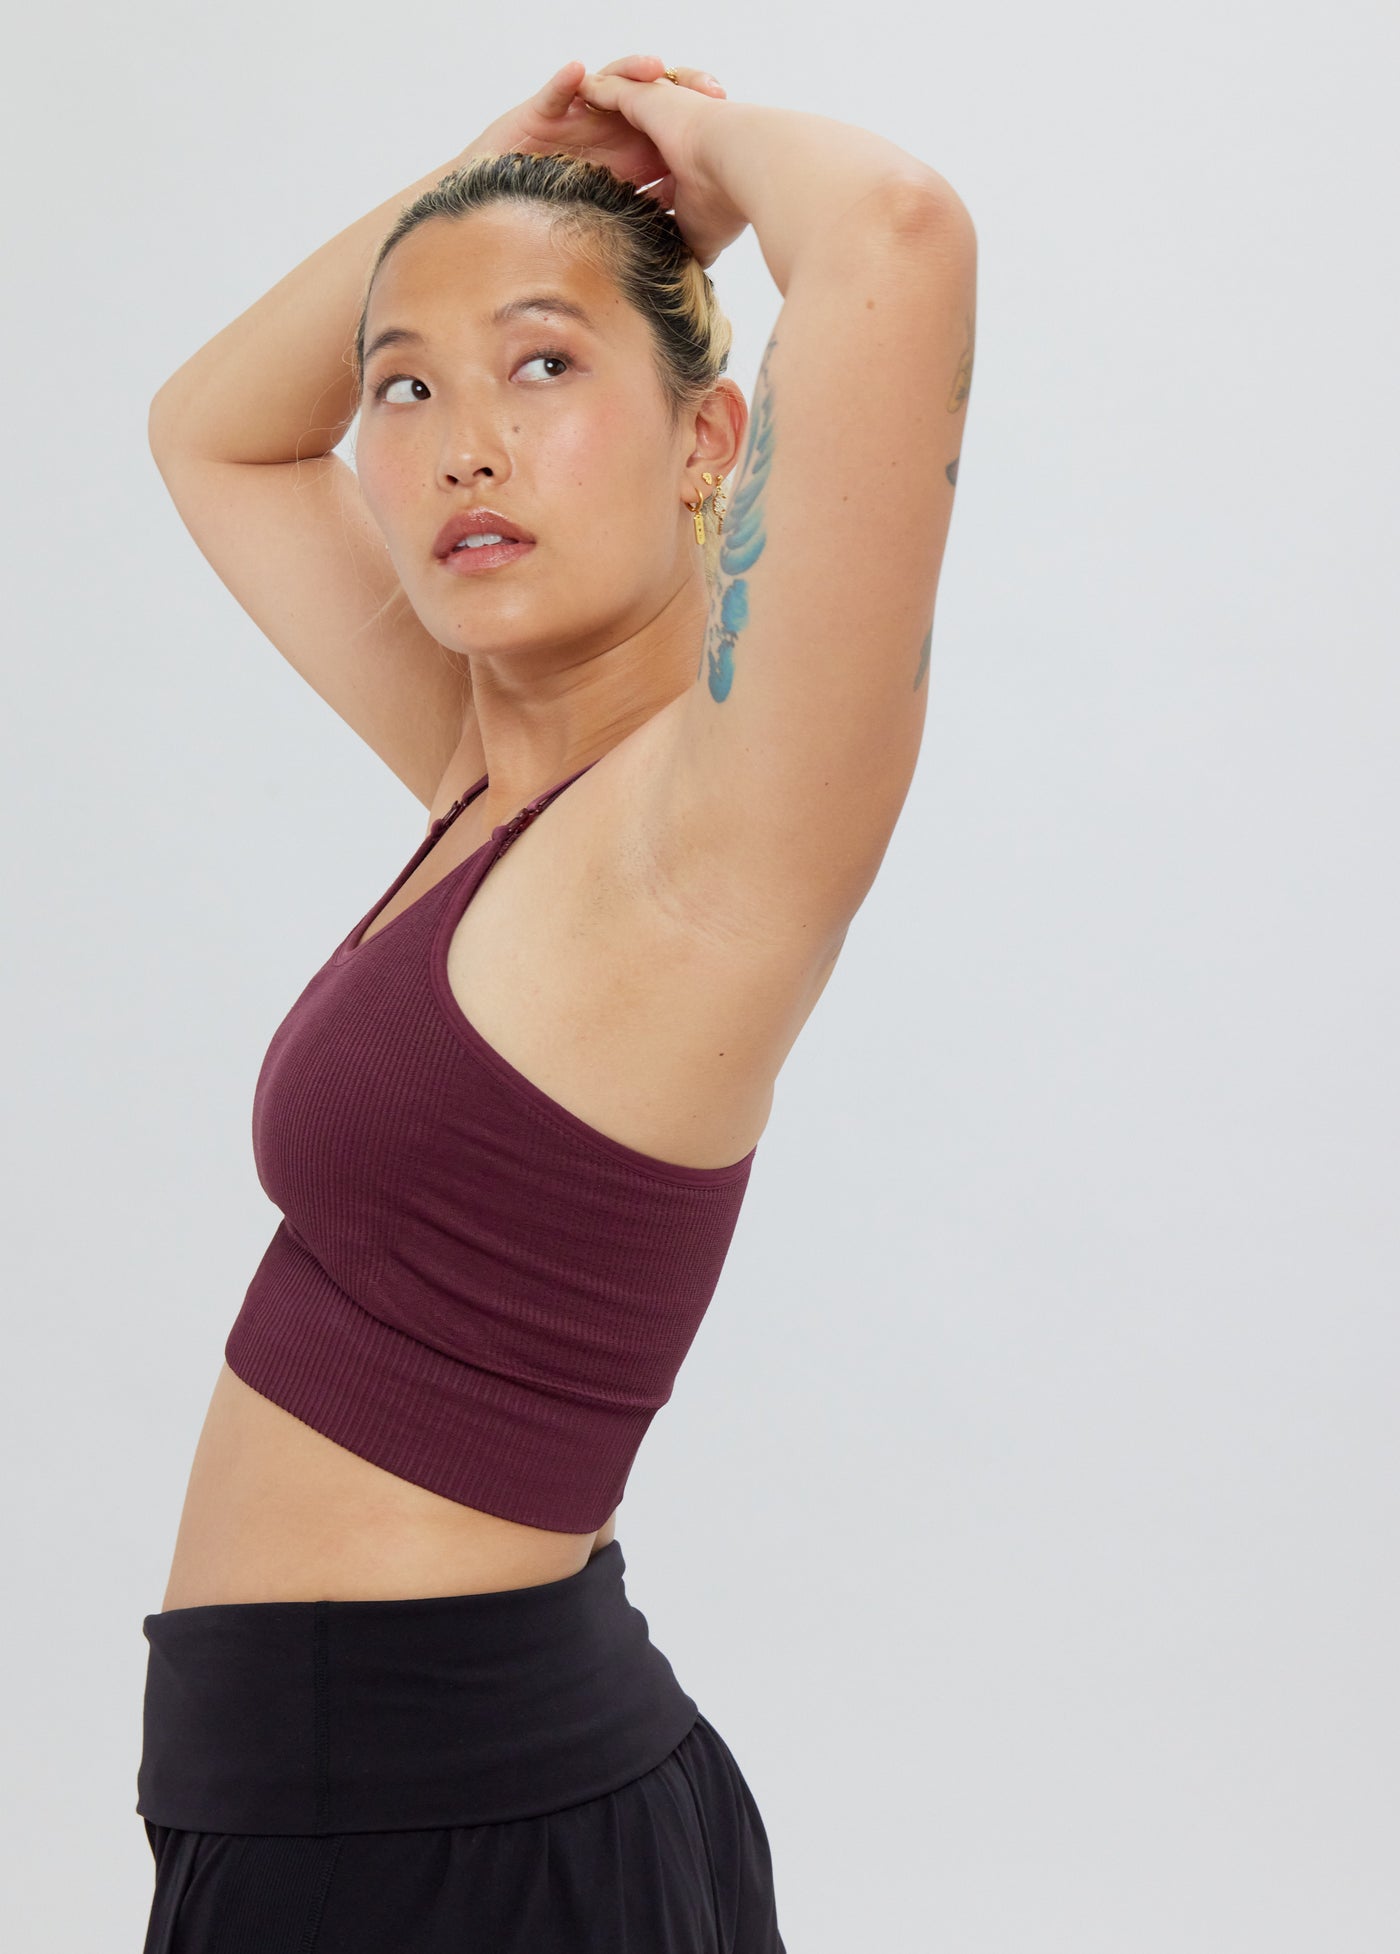 Breathable Seamless Push Up Maternity Sports Bra For Women LJ201204 From  Cong00, $12.47